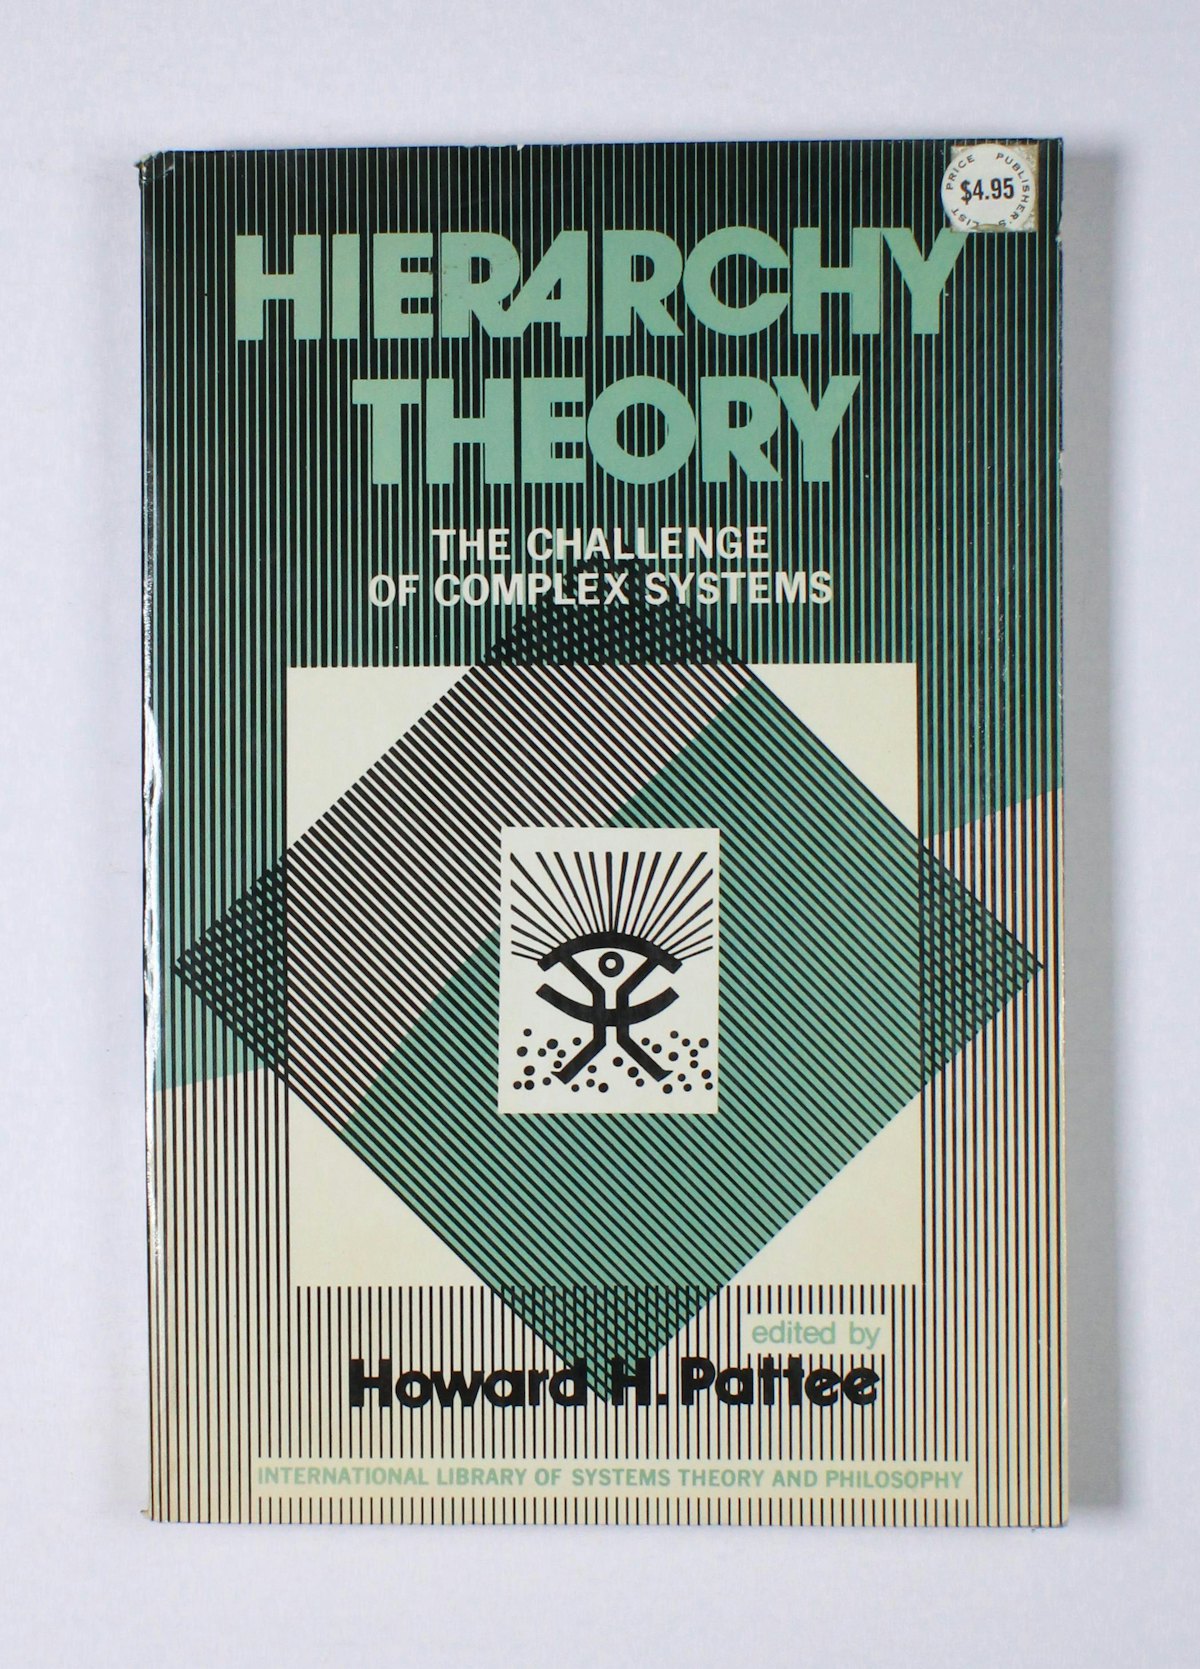 Hierarchy Theory: The Challenge of Complex Systems